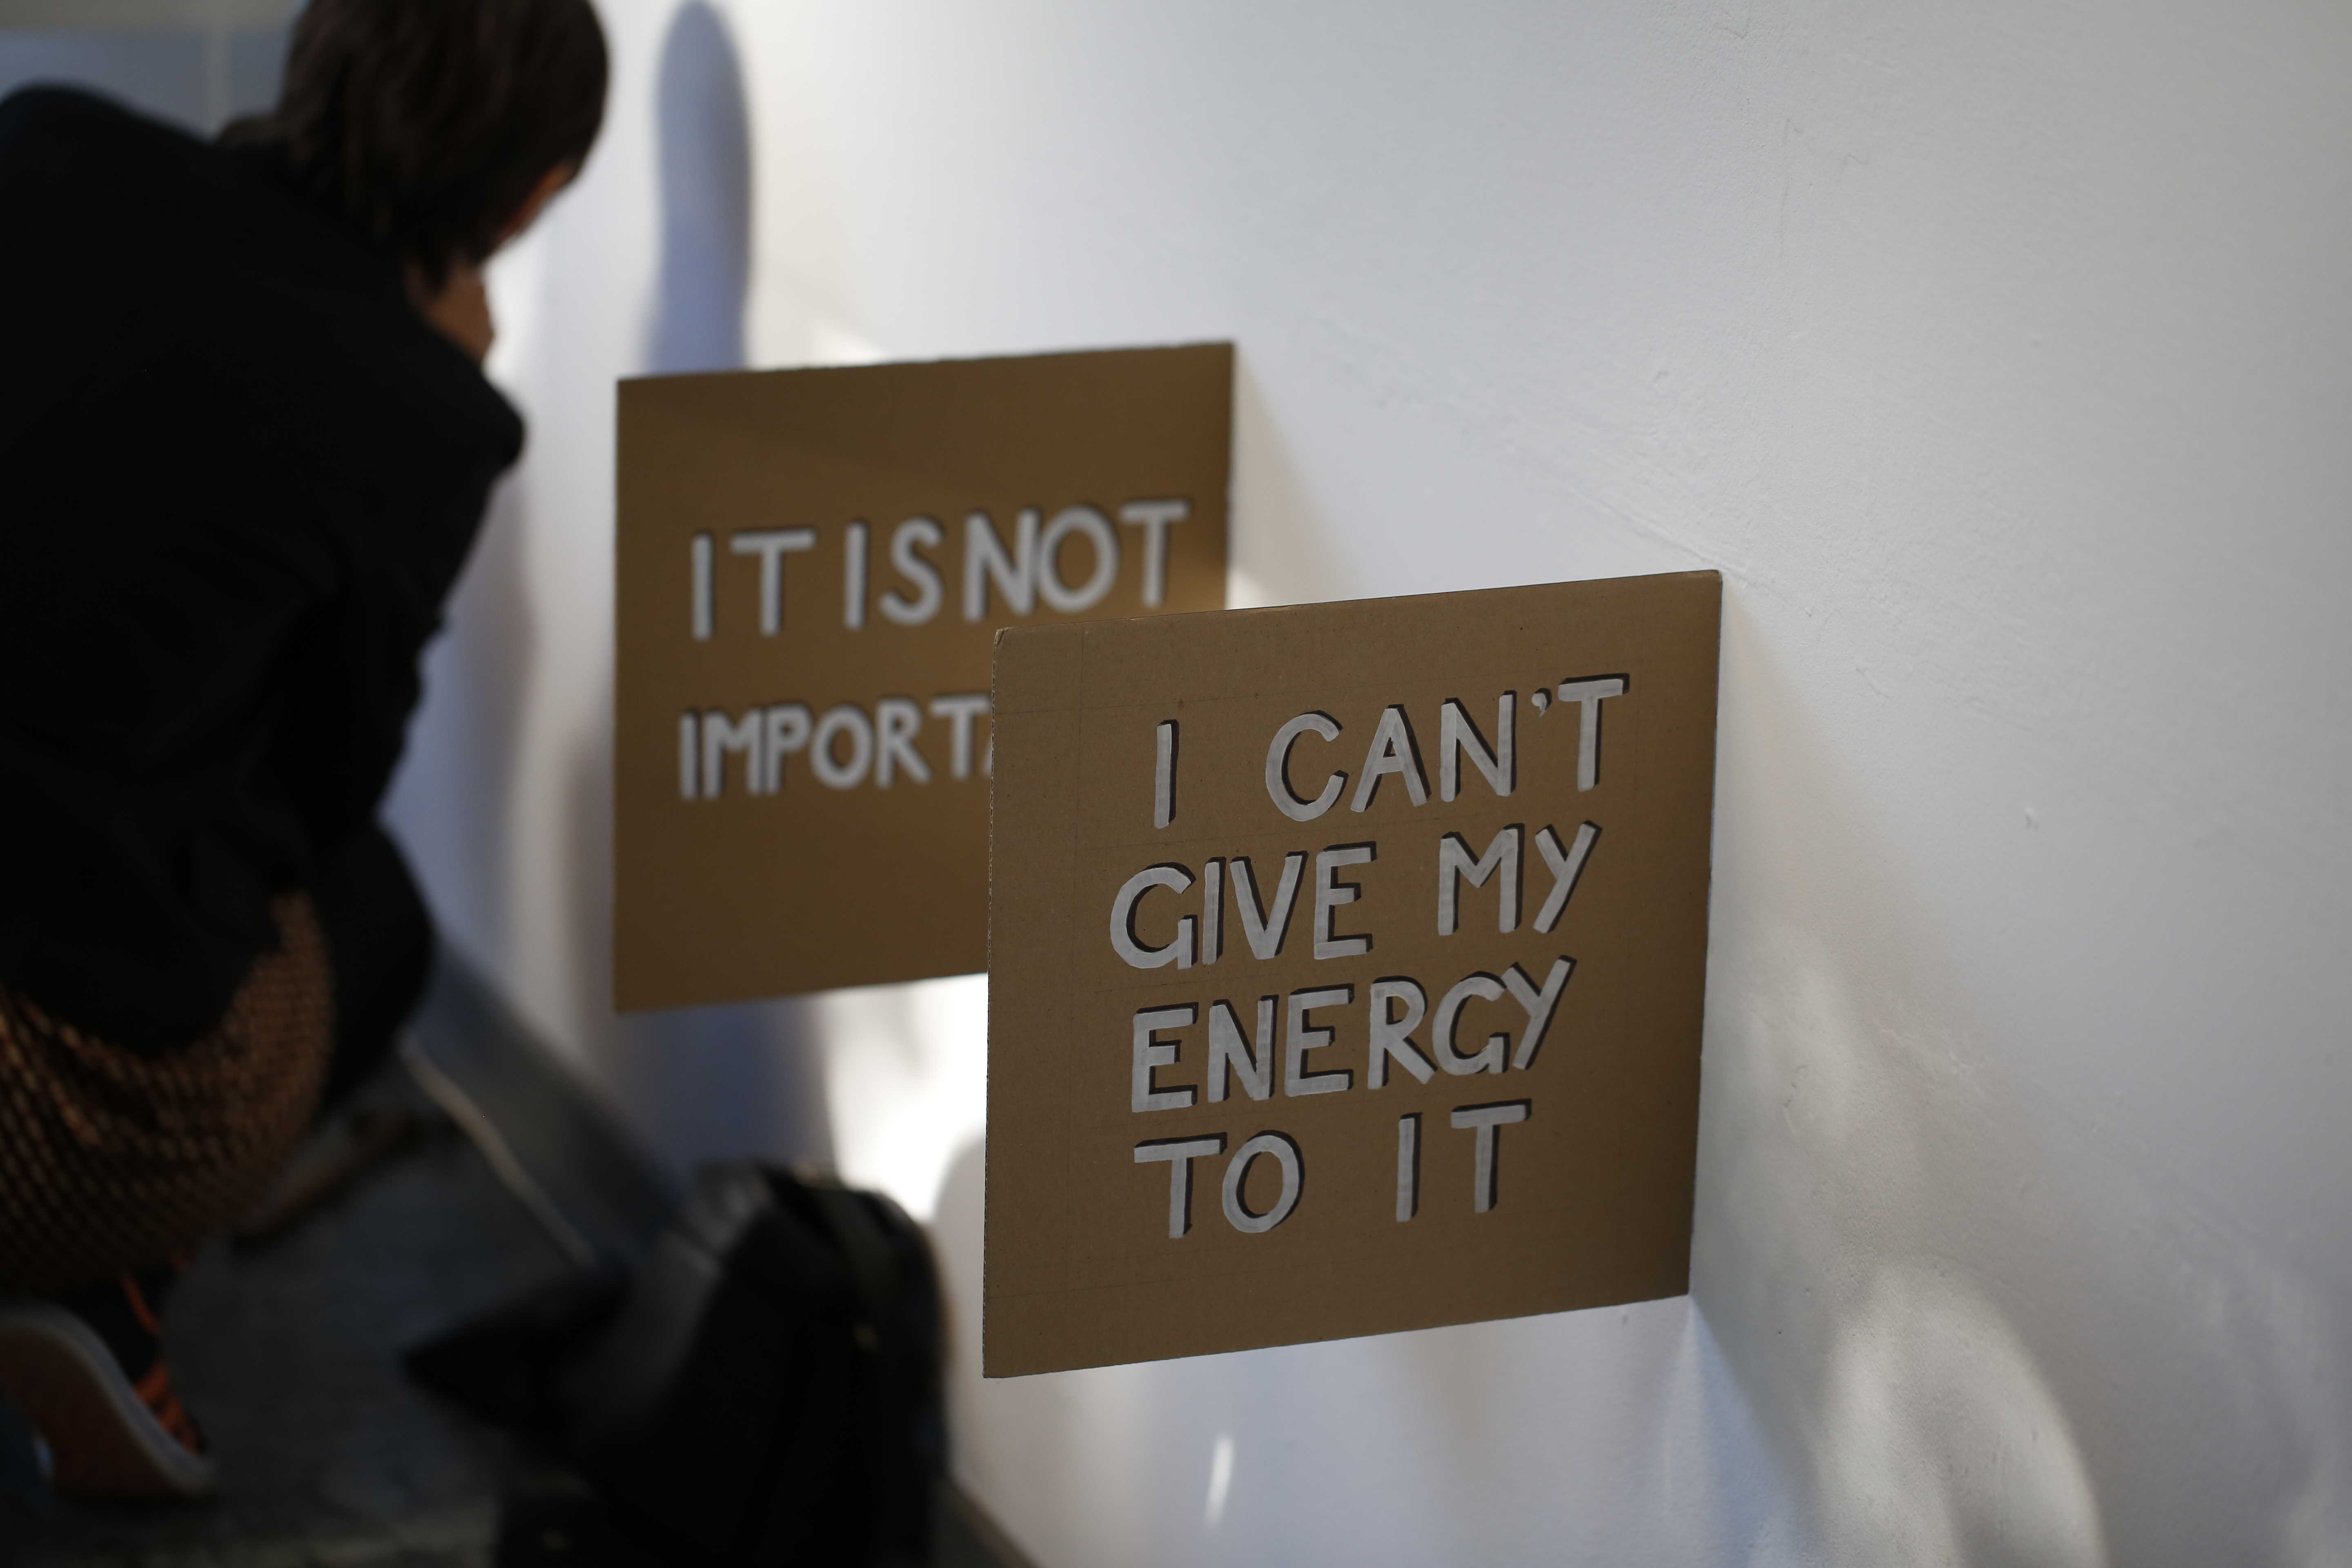 Eona Mcallum: I Can't Give My Energy To It- installation at Upominki, 2014